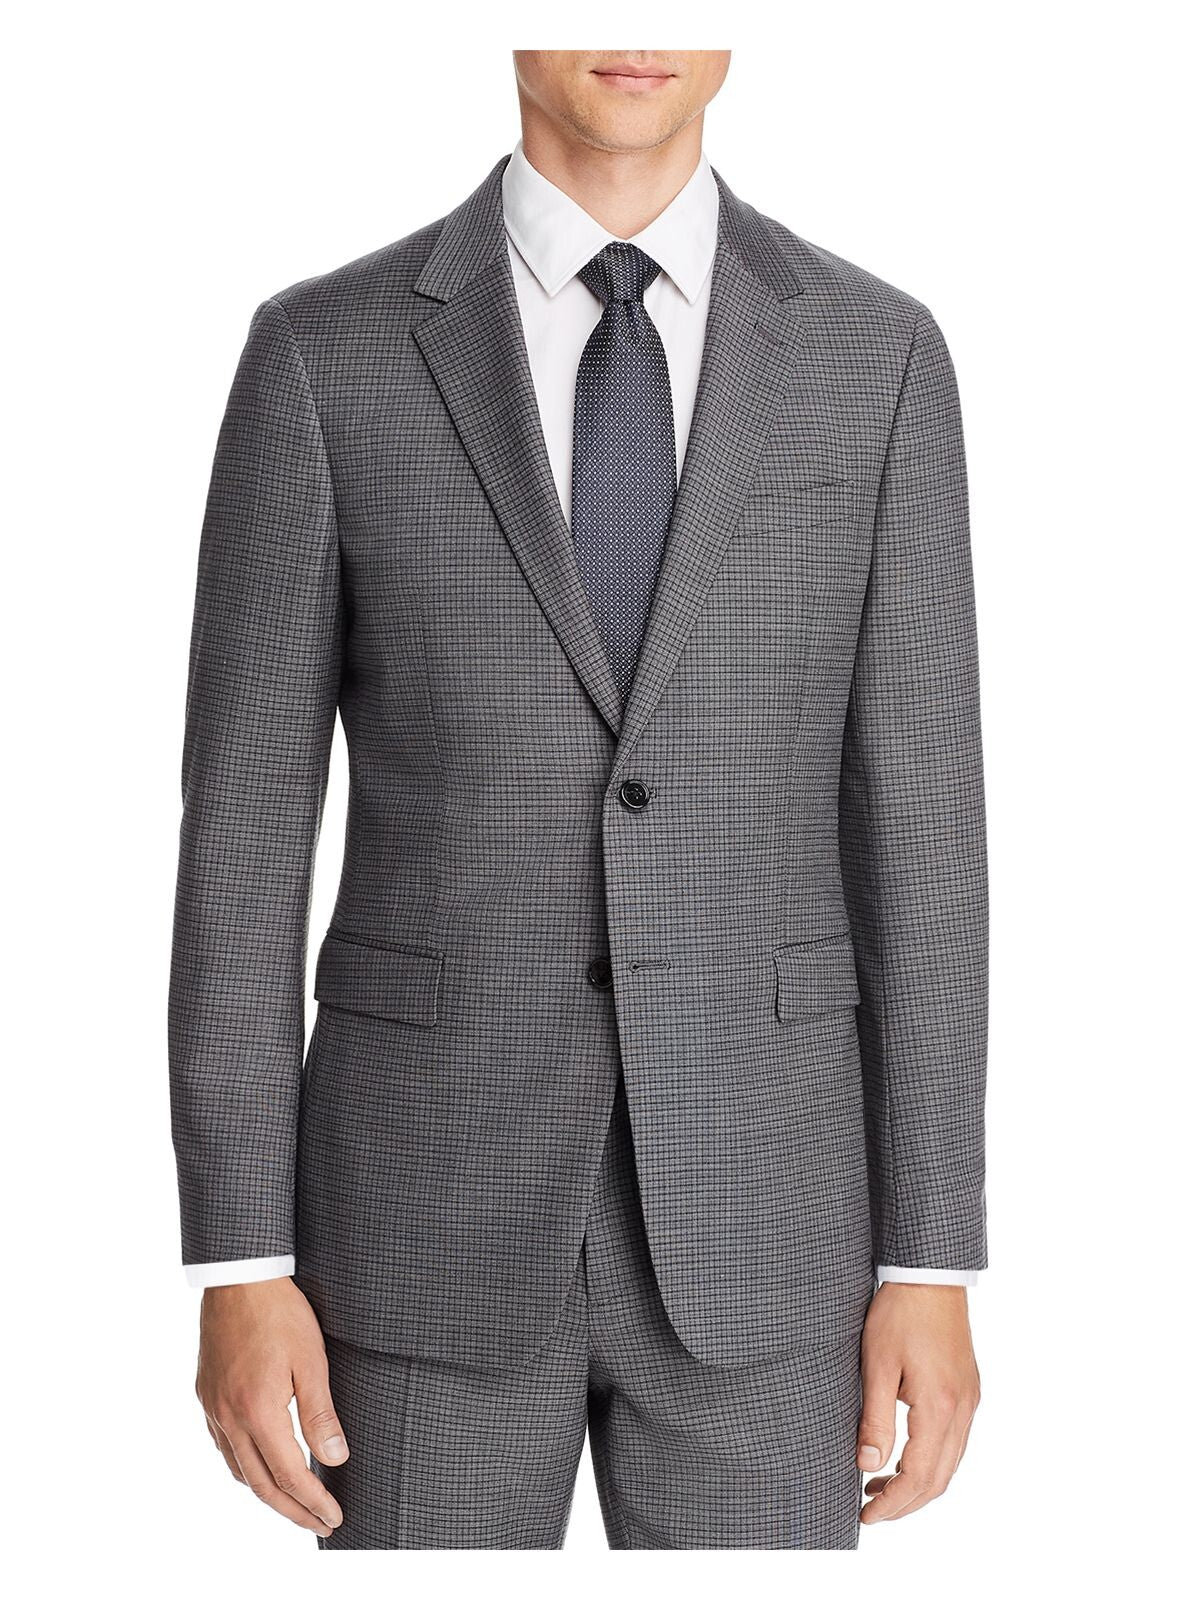 THEORY Mens Chambers Gray Single Breasted, Check Wool Blend Blazer Jacket 46R